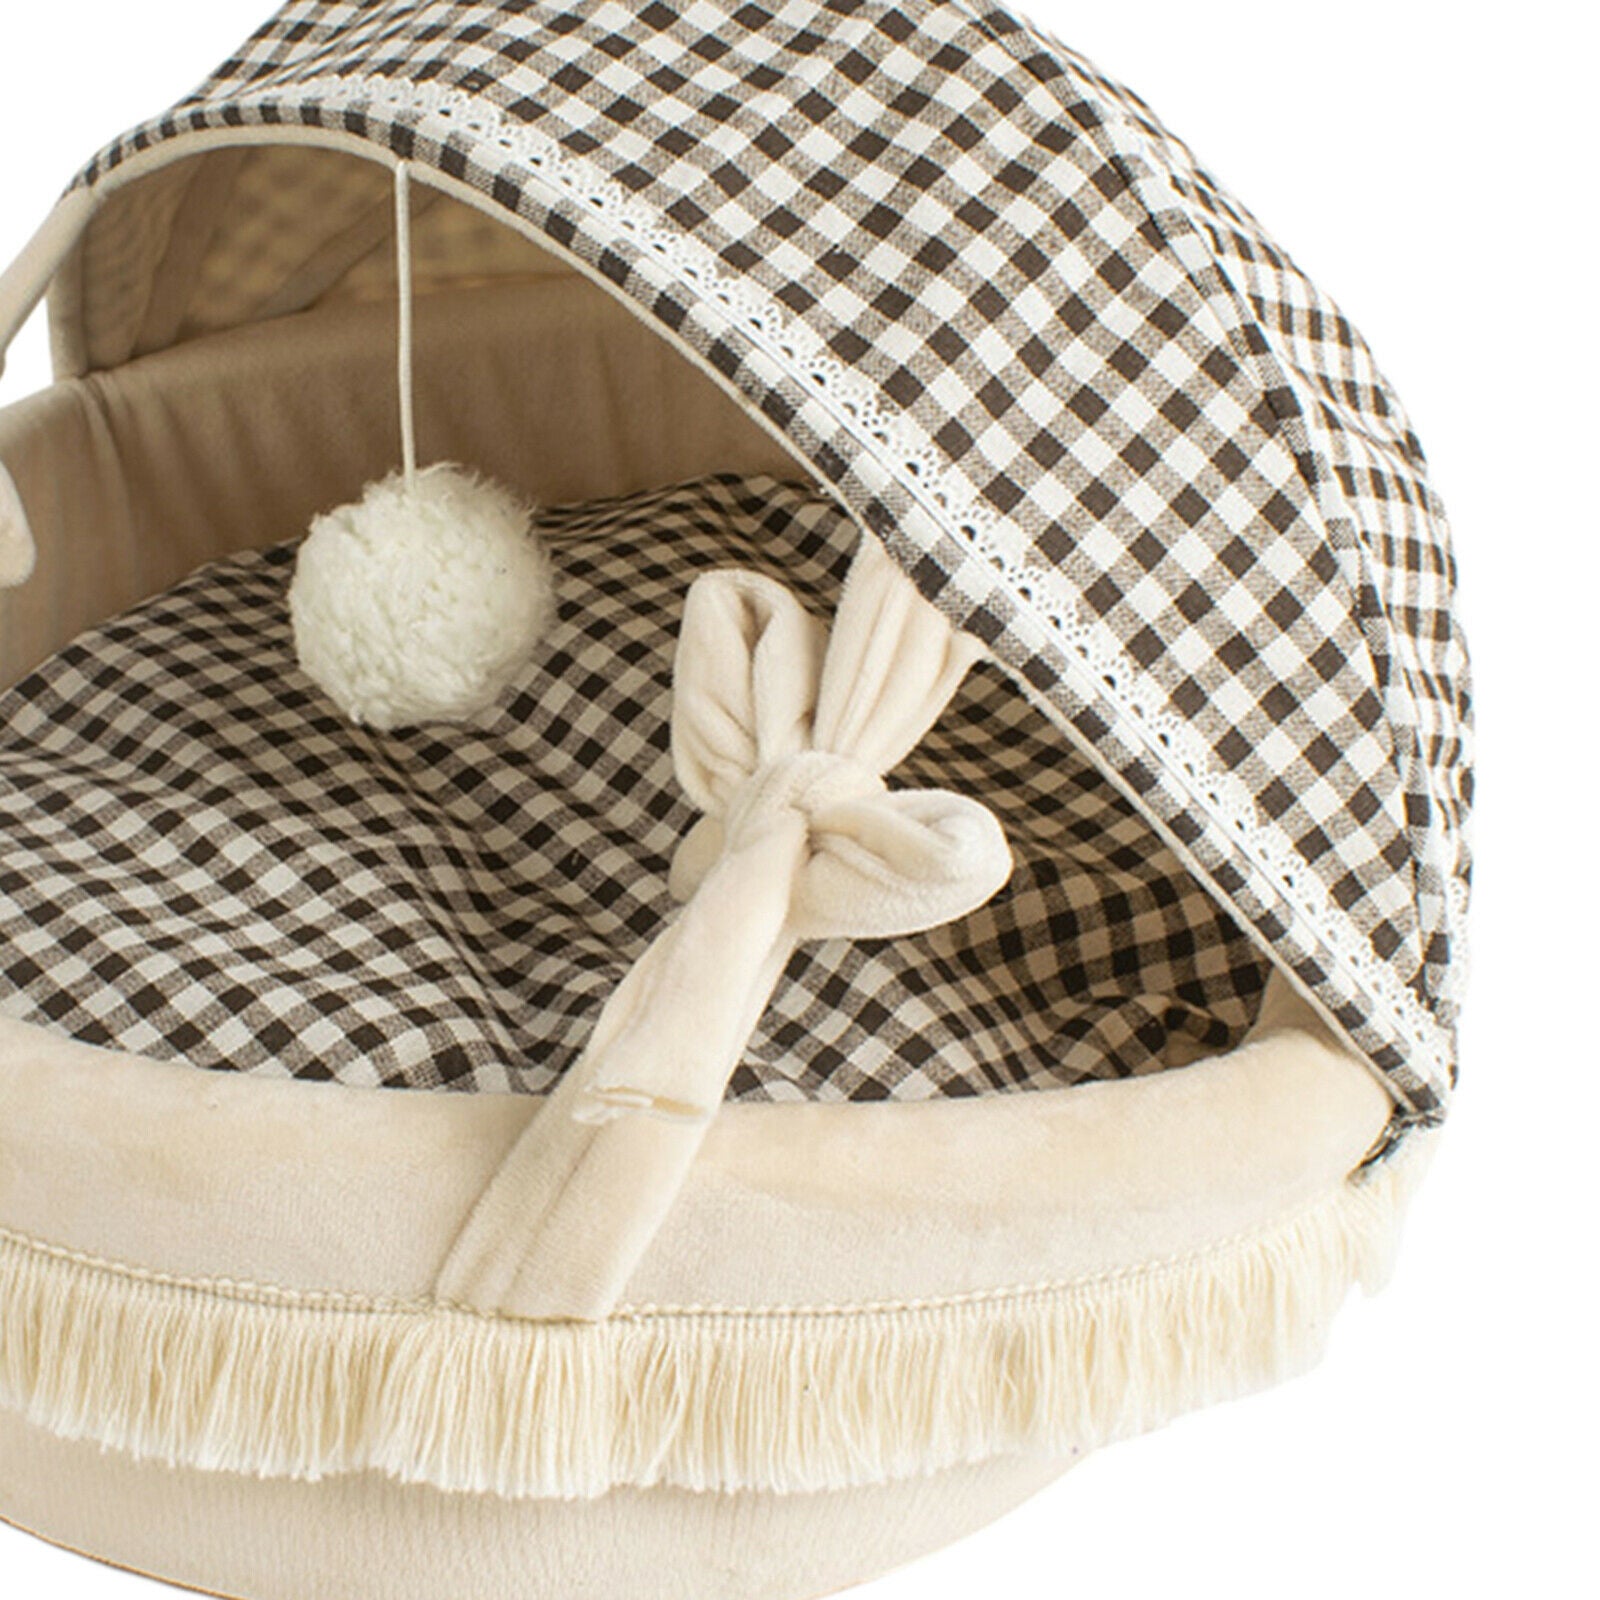 Pet Nest Bed Adjustable Warm Cave Nest Cute with Foldable Cover for Puppy